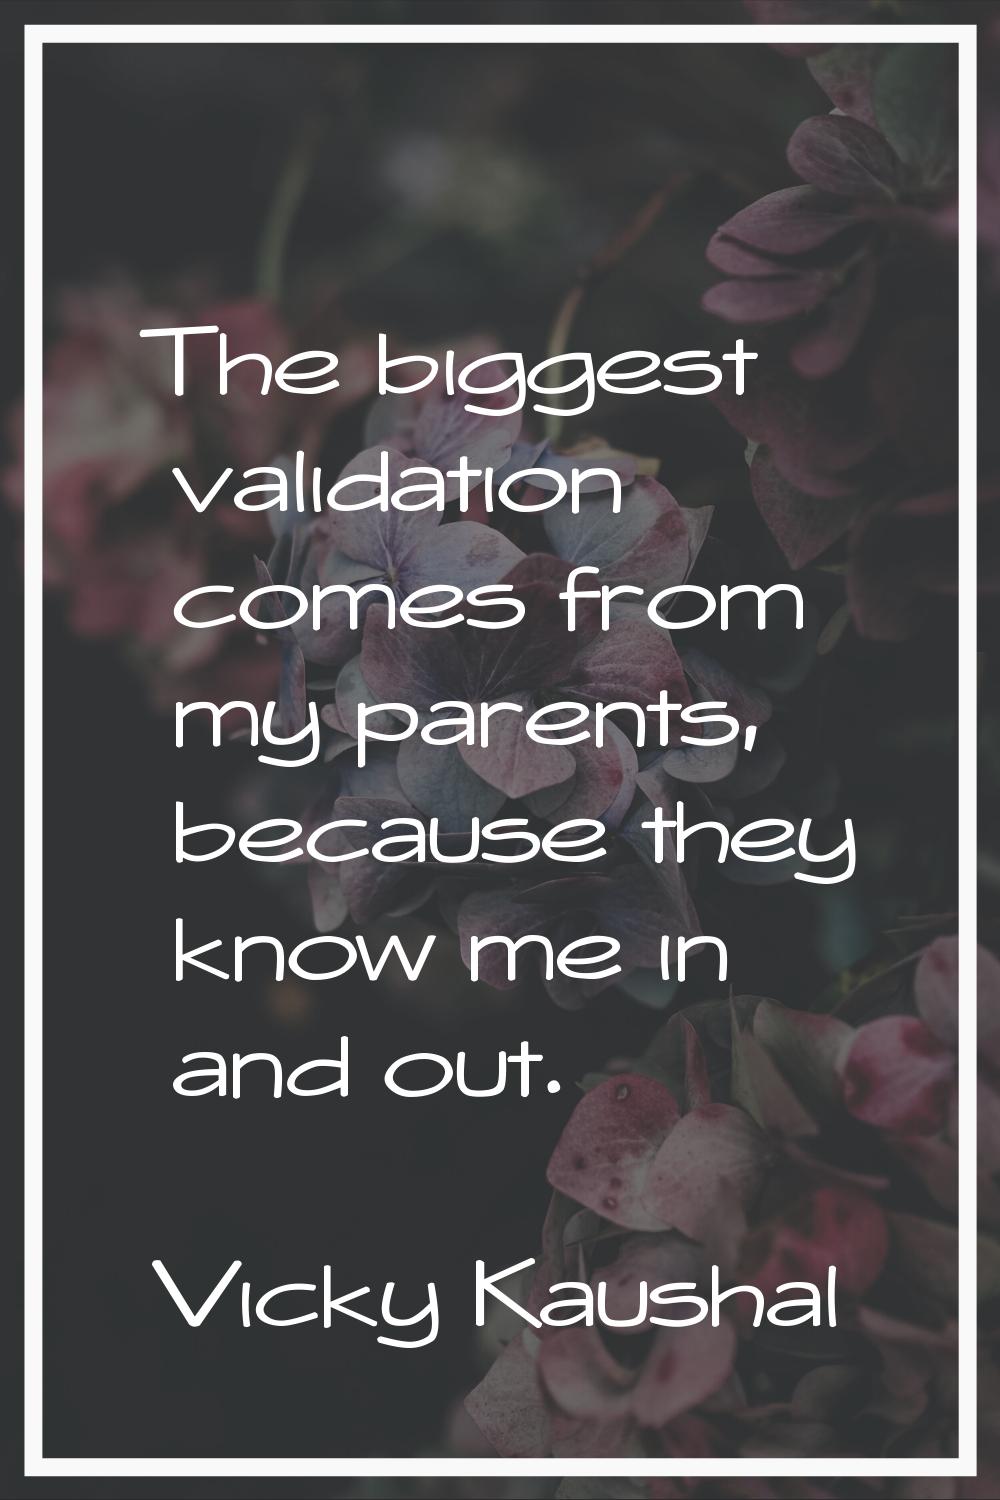 The biggest validation comes from my parents, because they know me in and out.